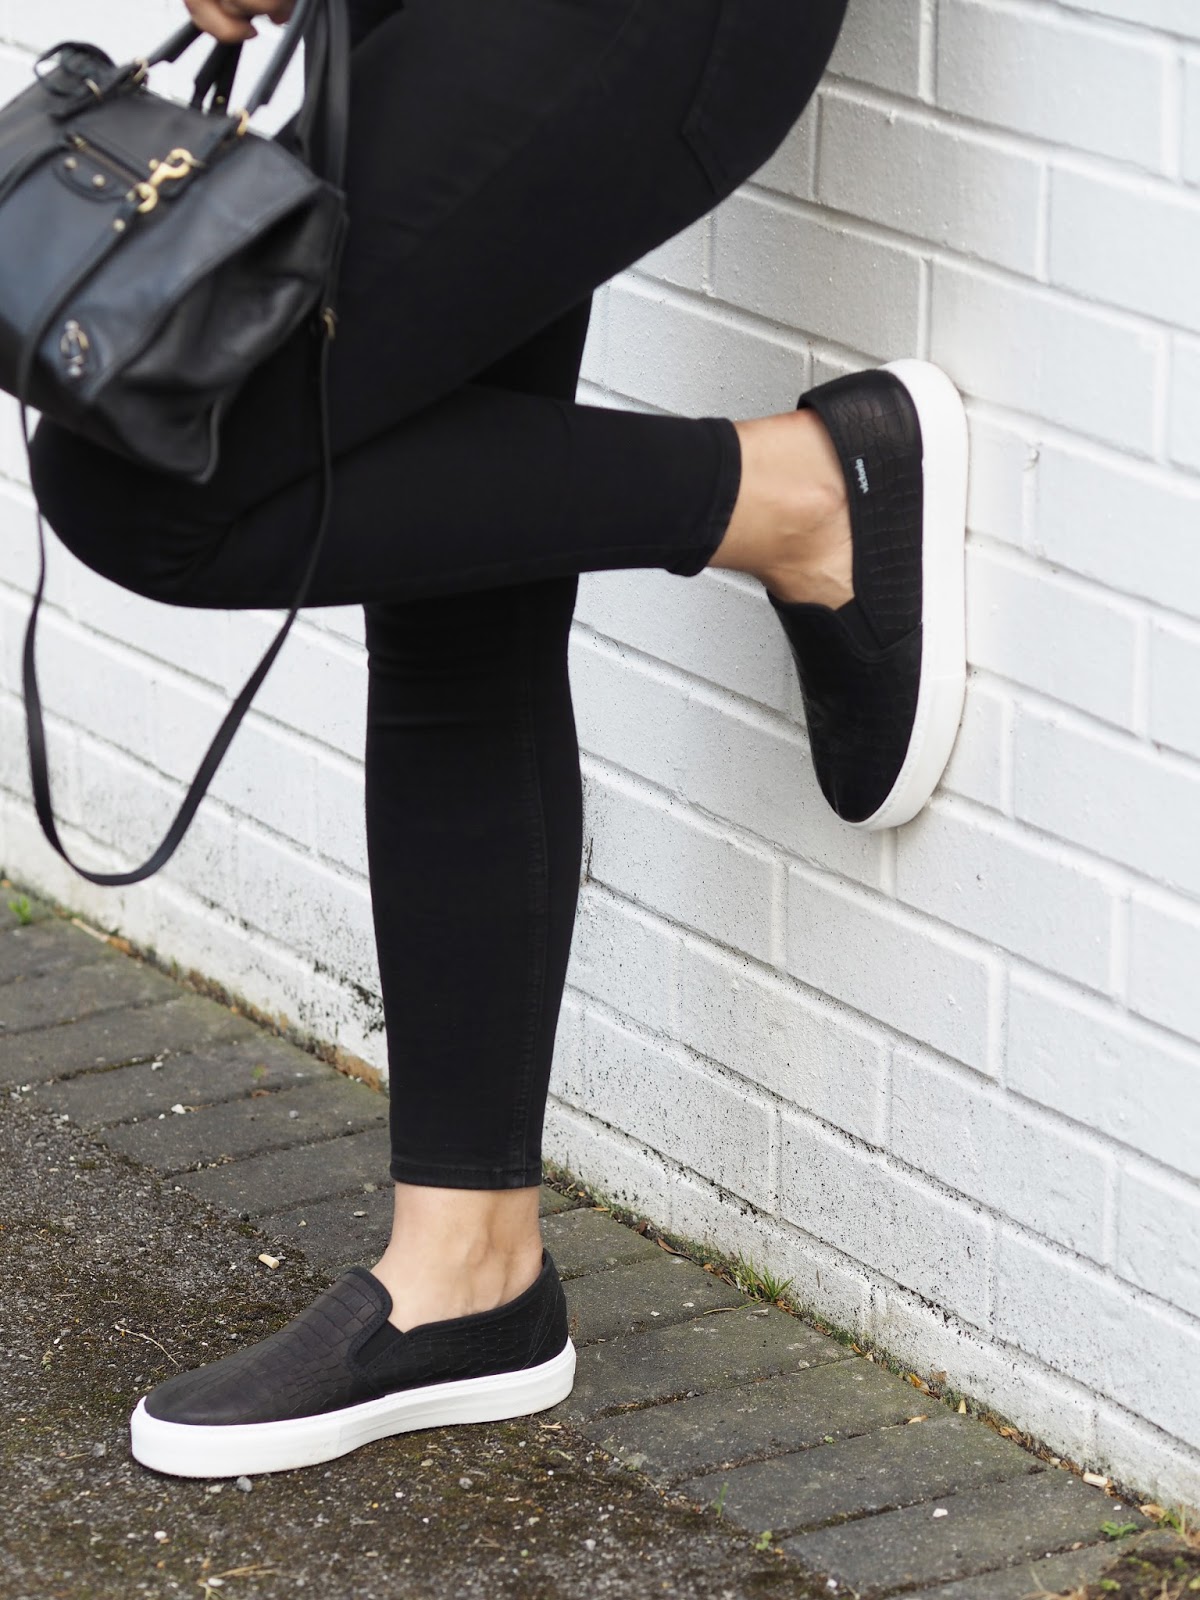 Creepers & Cupcakes: 10 Basic Style Rules I Live By